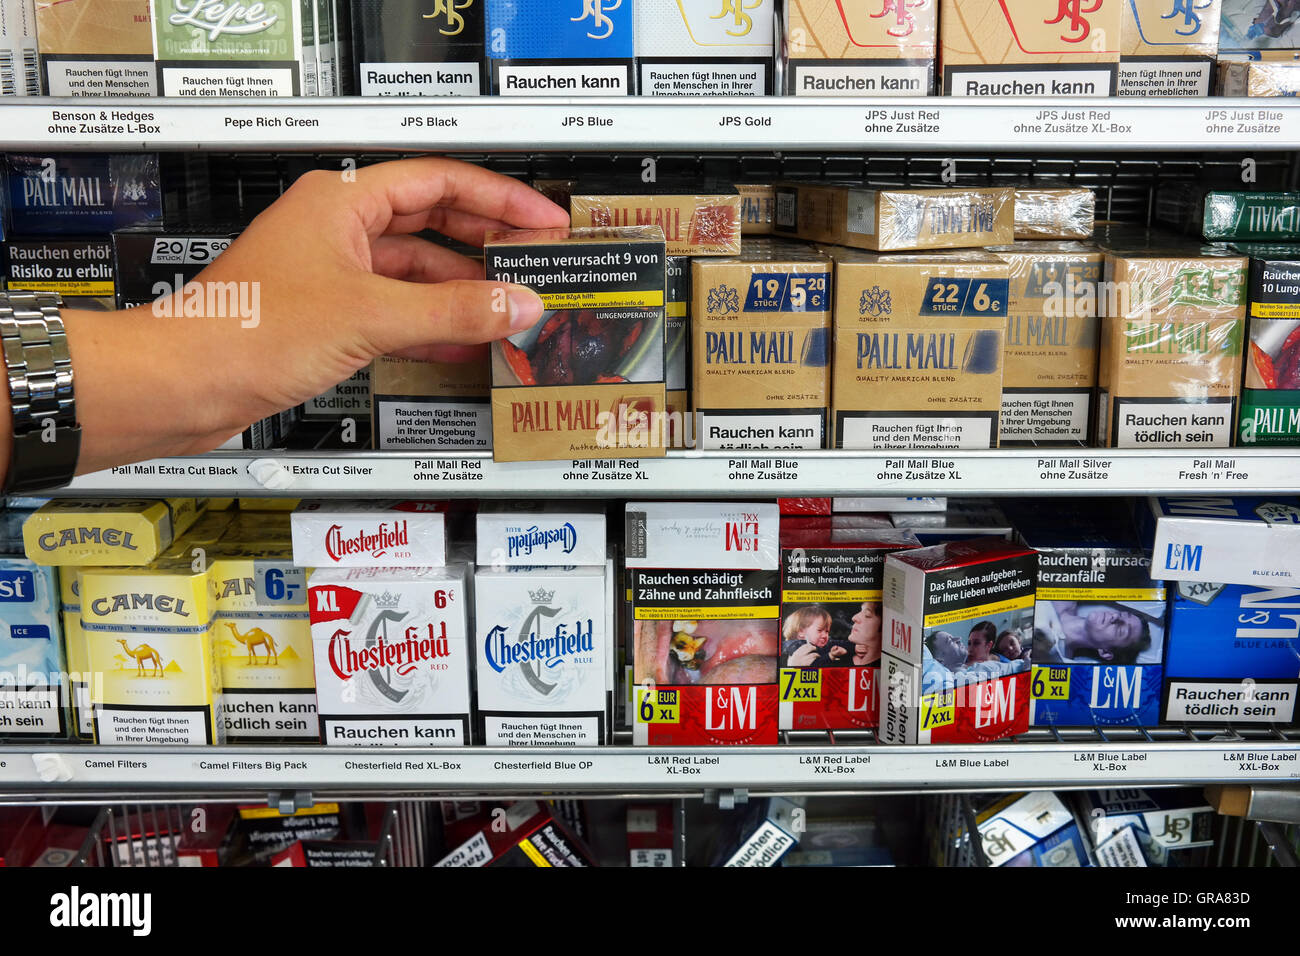 Cigarette packings with pictures on cigarette packs to illustrate the dangers of smoking. Stock Photo